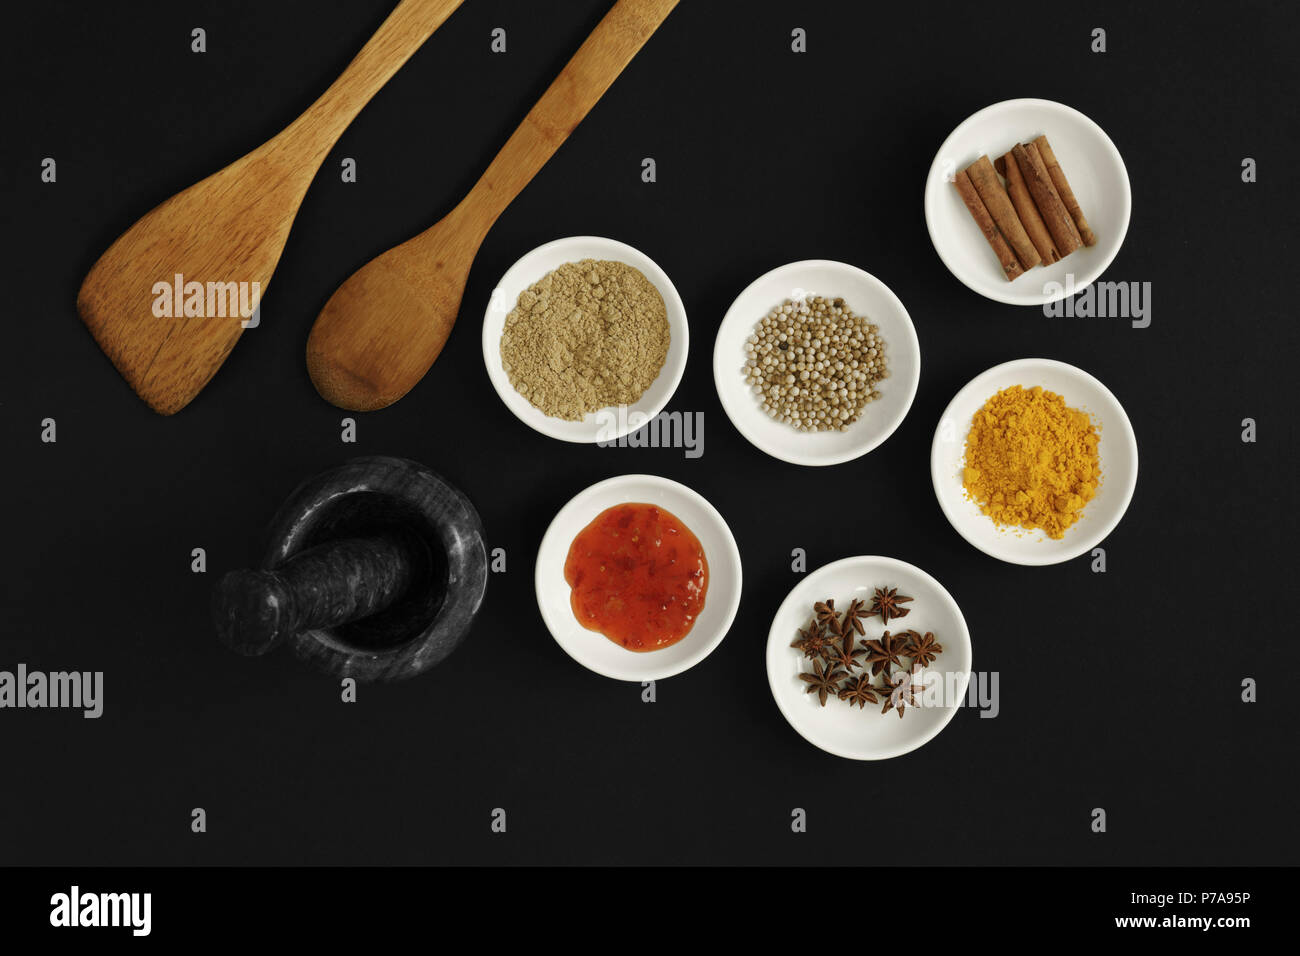 Asian spices, herbs and cooking ingredients on black background. Stock Photo